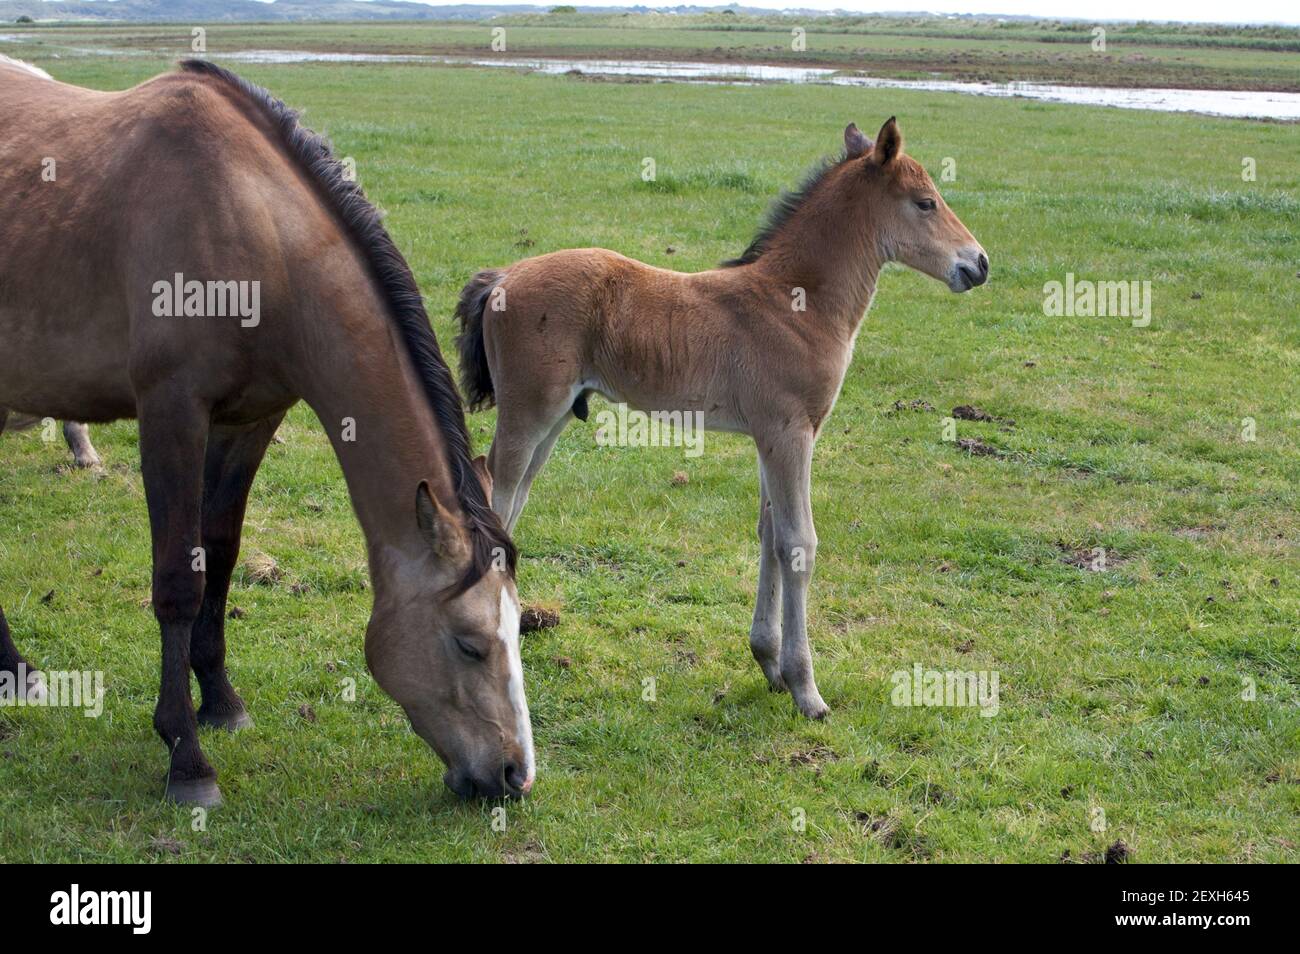 A Young Horse Foal Filly Standing in a Field Meadow Stock Photo